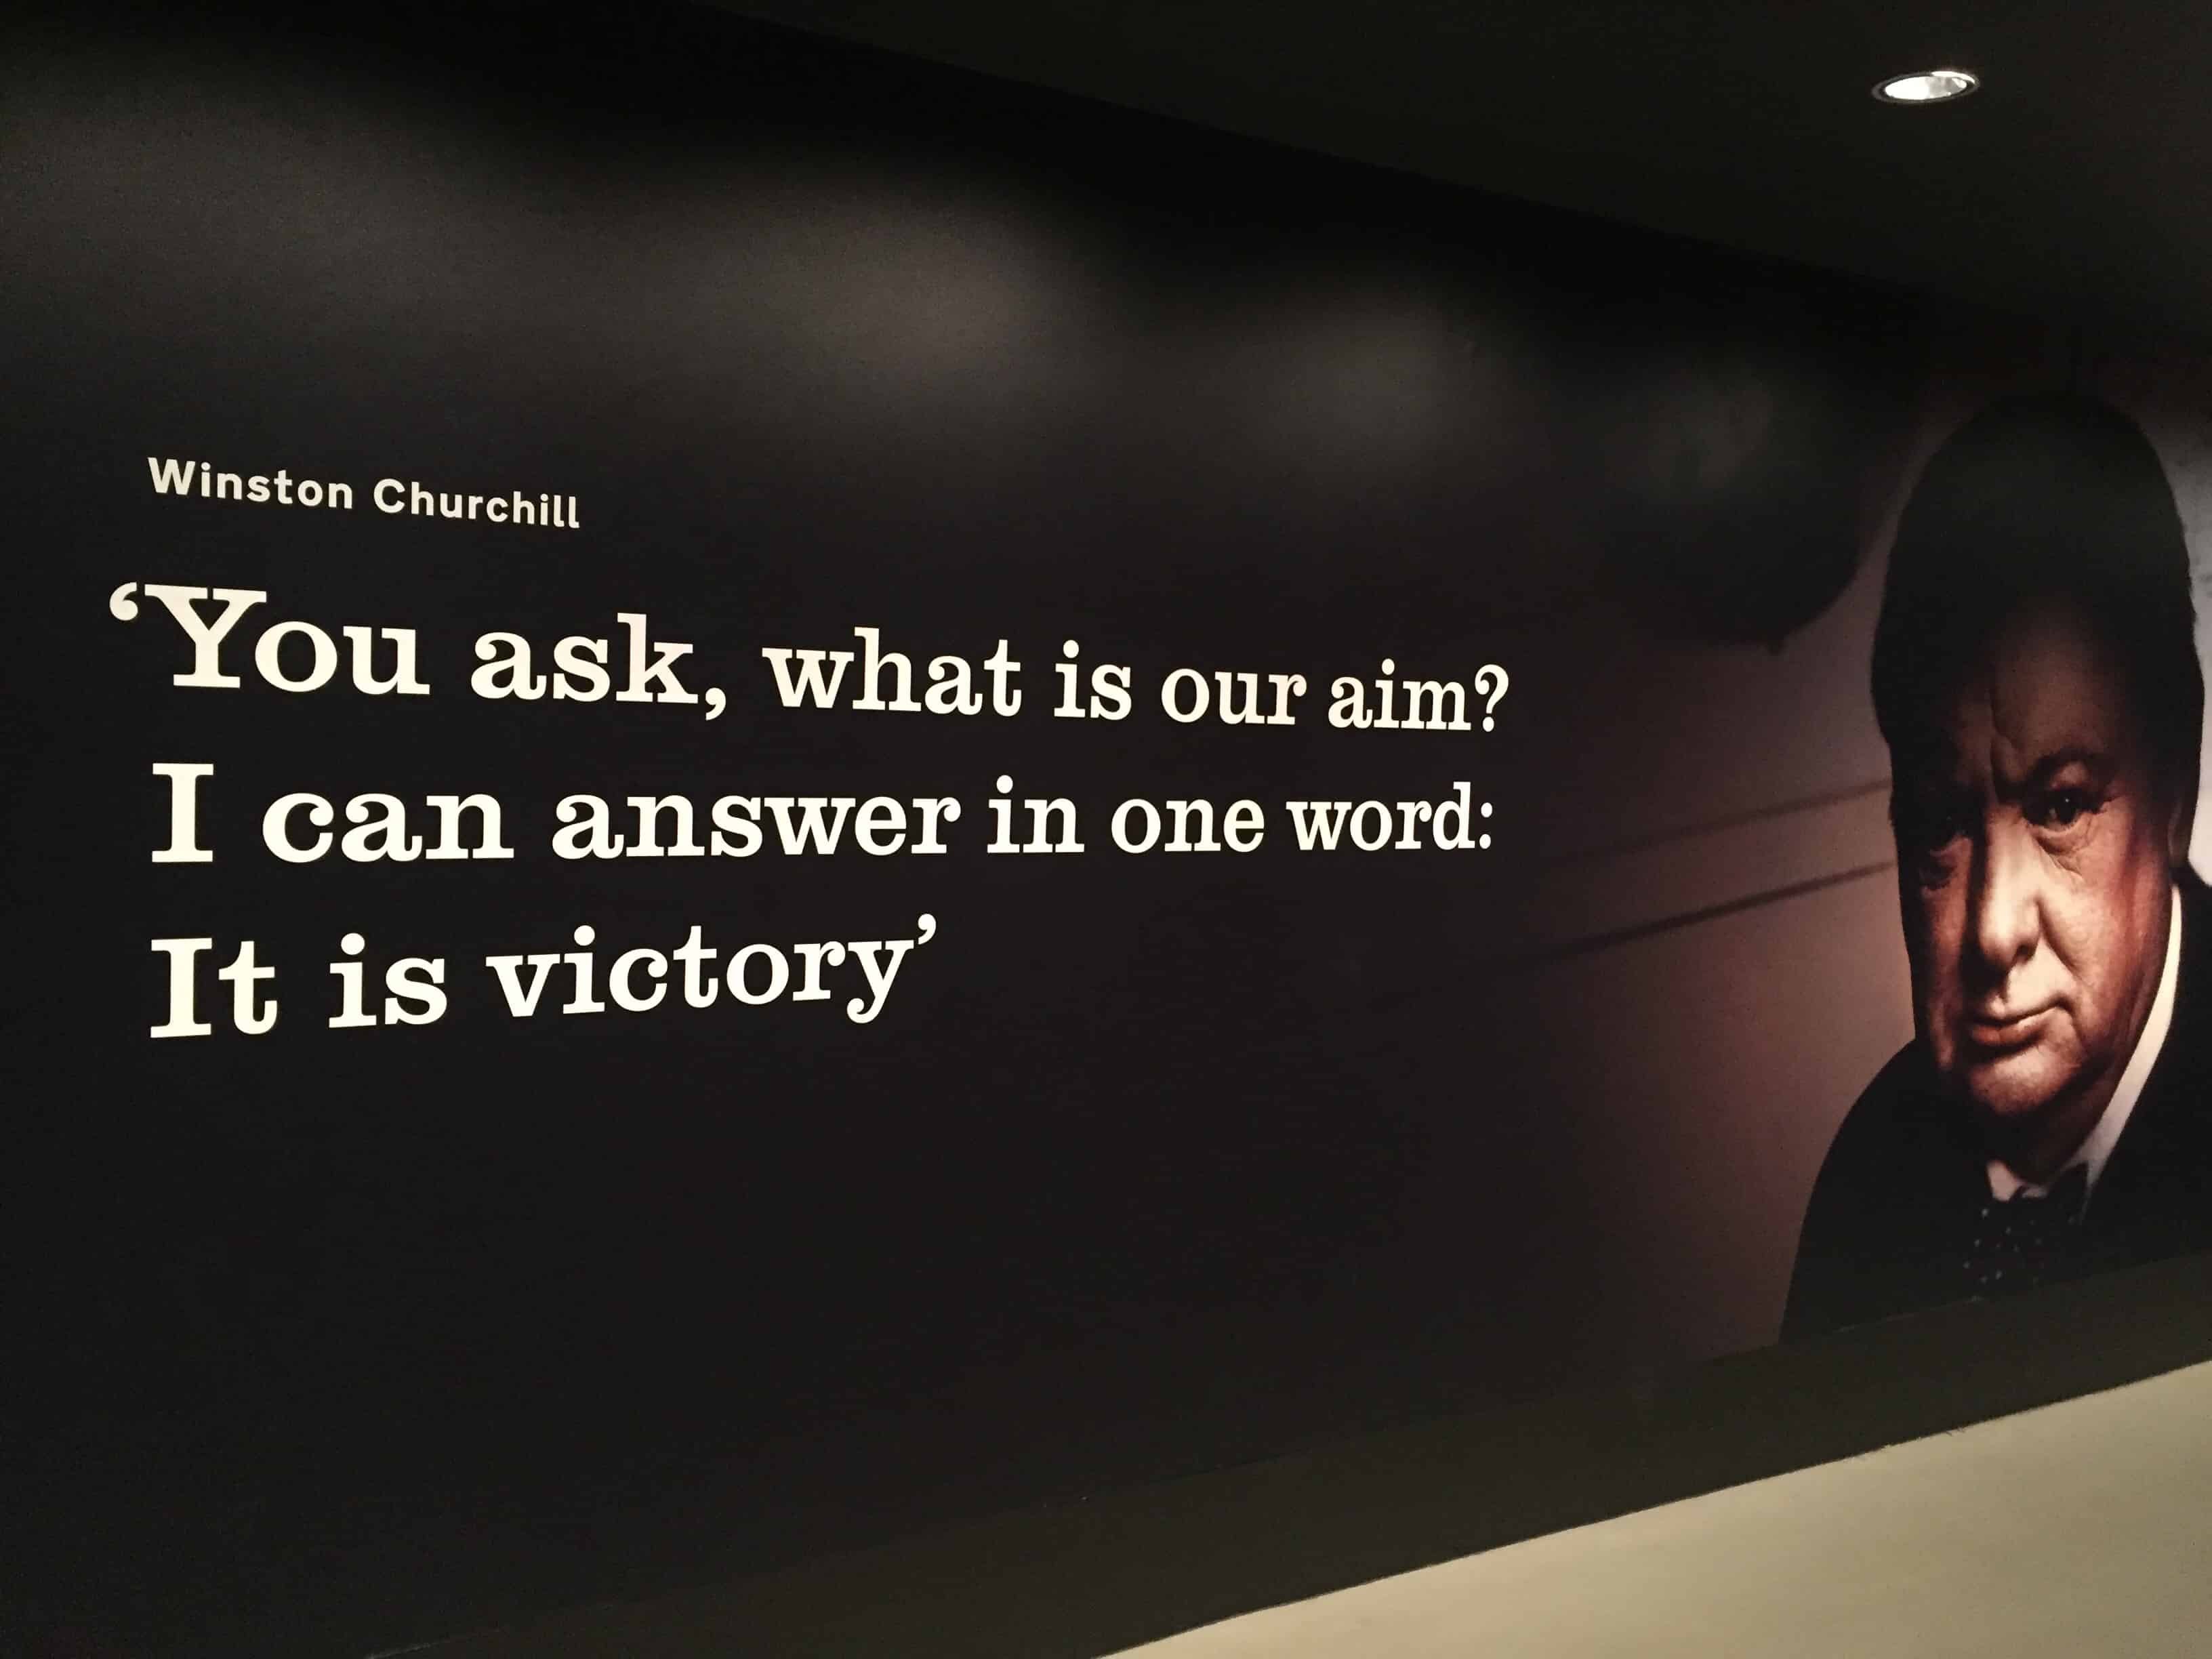 Quote of Winston Churchill displayed at The Churchill War Rooms